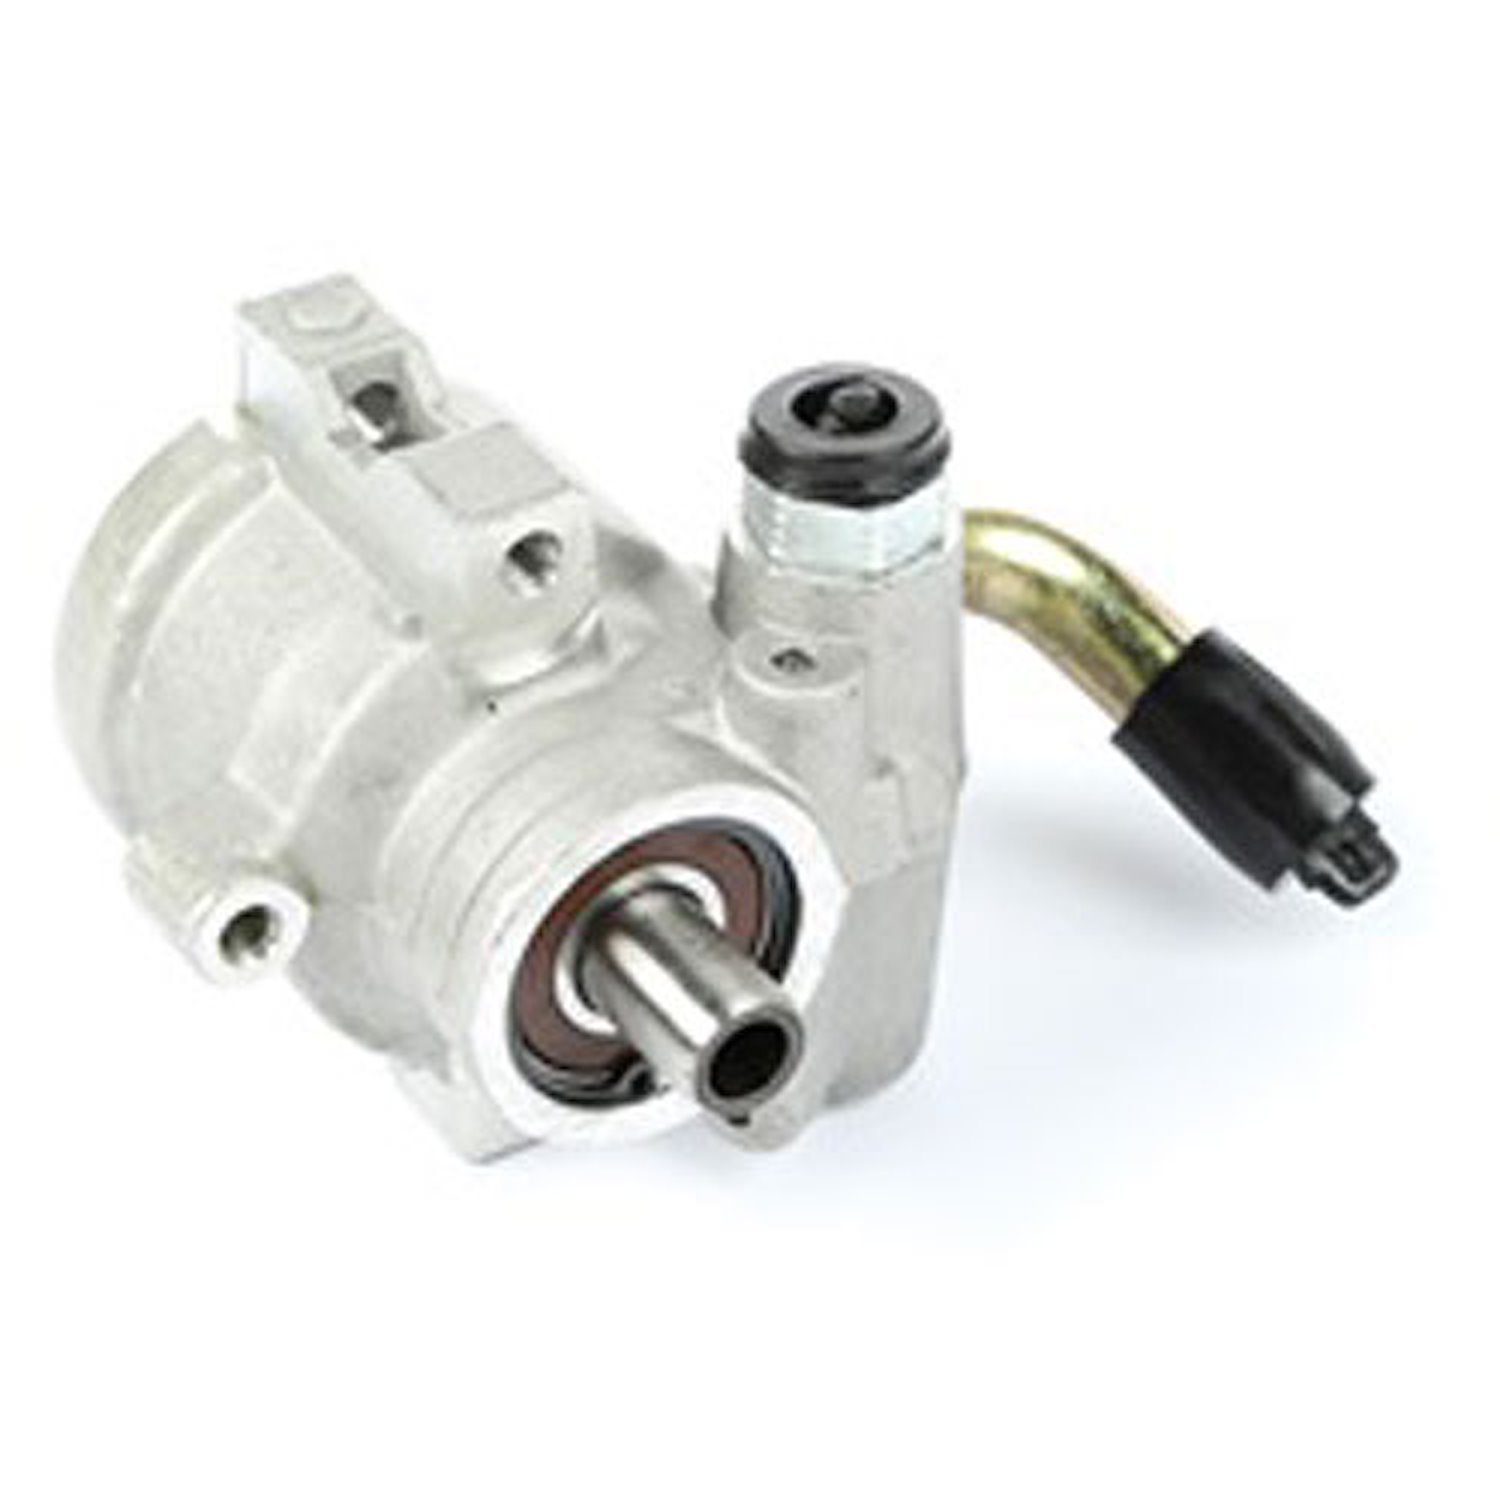 This power steering pump from Omix-ADA fits 91-95 Jeep Cherokees and 91-02 Wranglers with a 2.5L eng